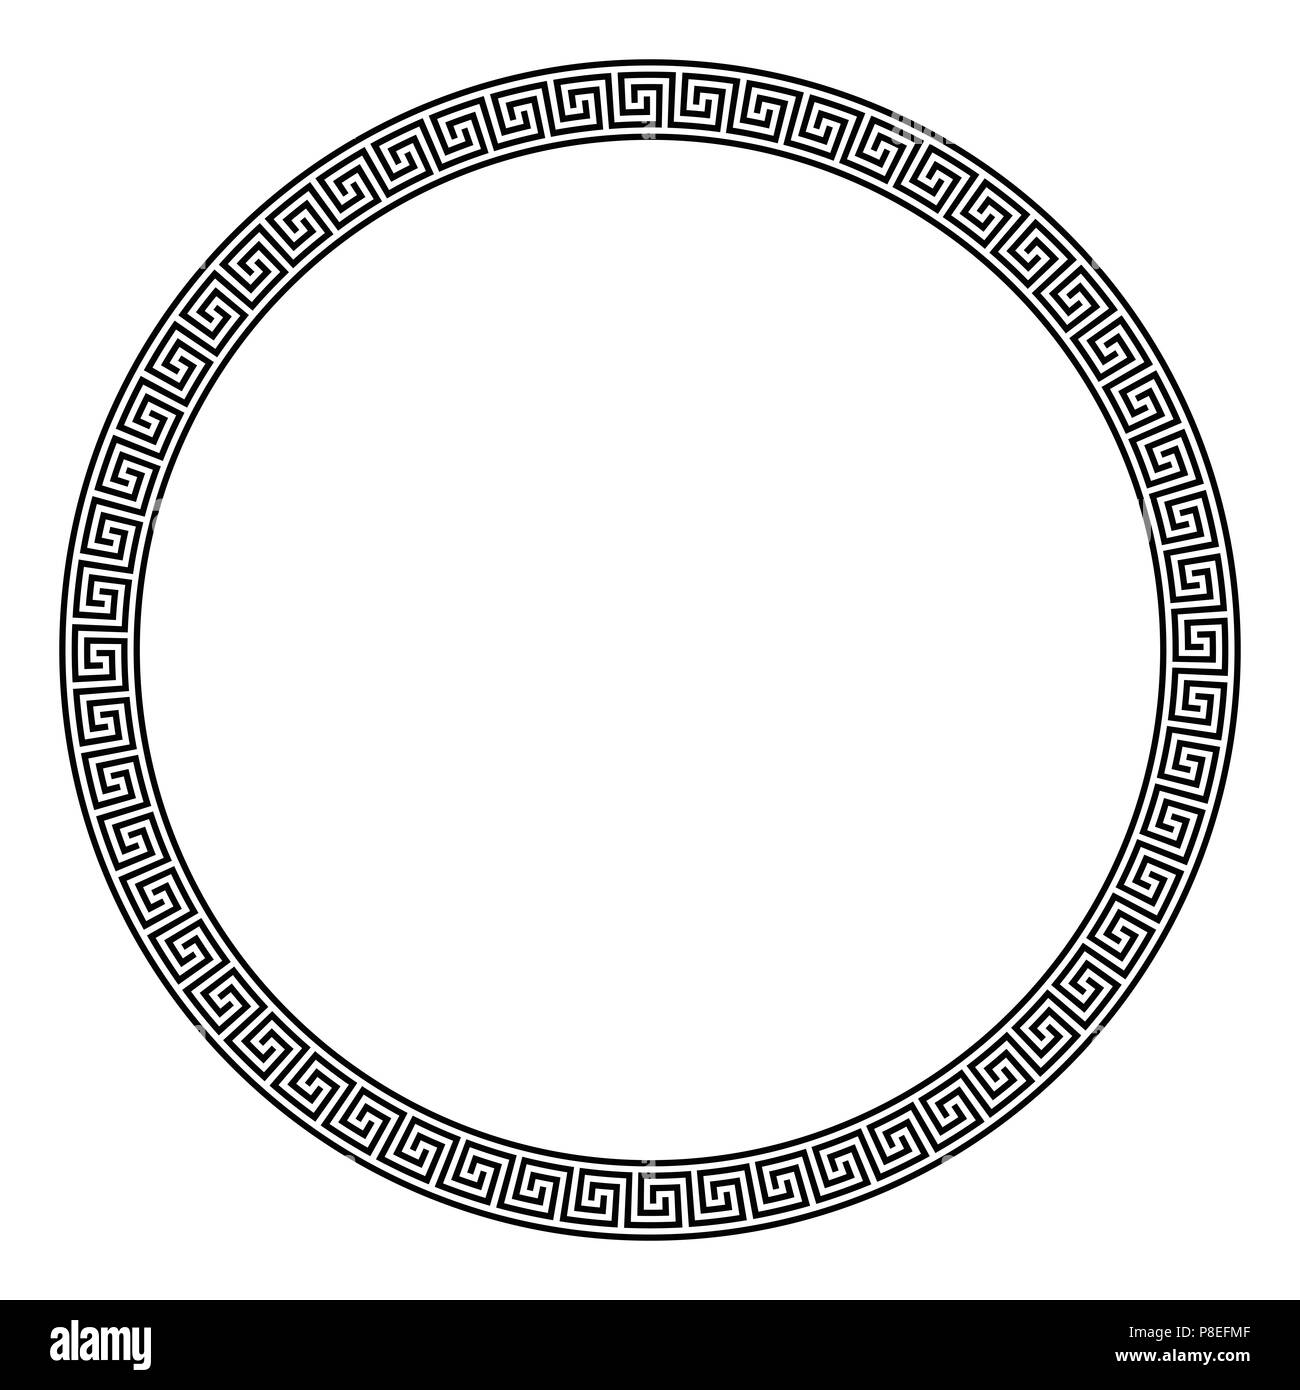 Circle frame made of seamless meander pattern. Meandros, a decorative border, constructed from continuous lines, shaped into a repeated motif. Stock Photo